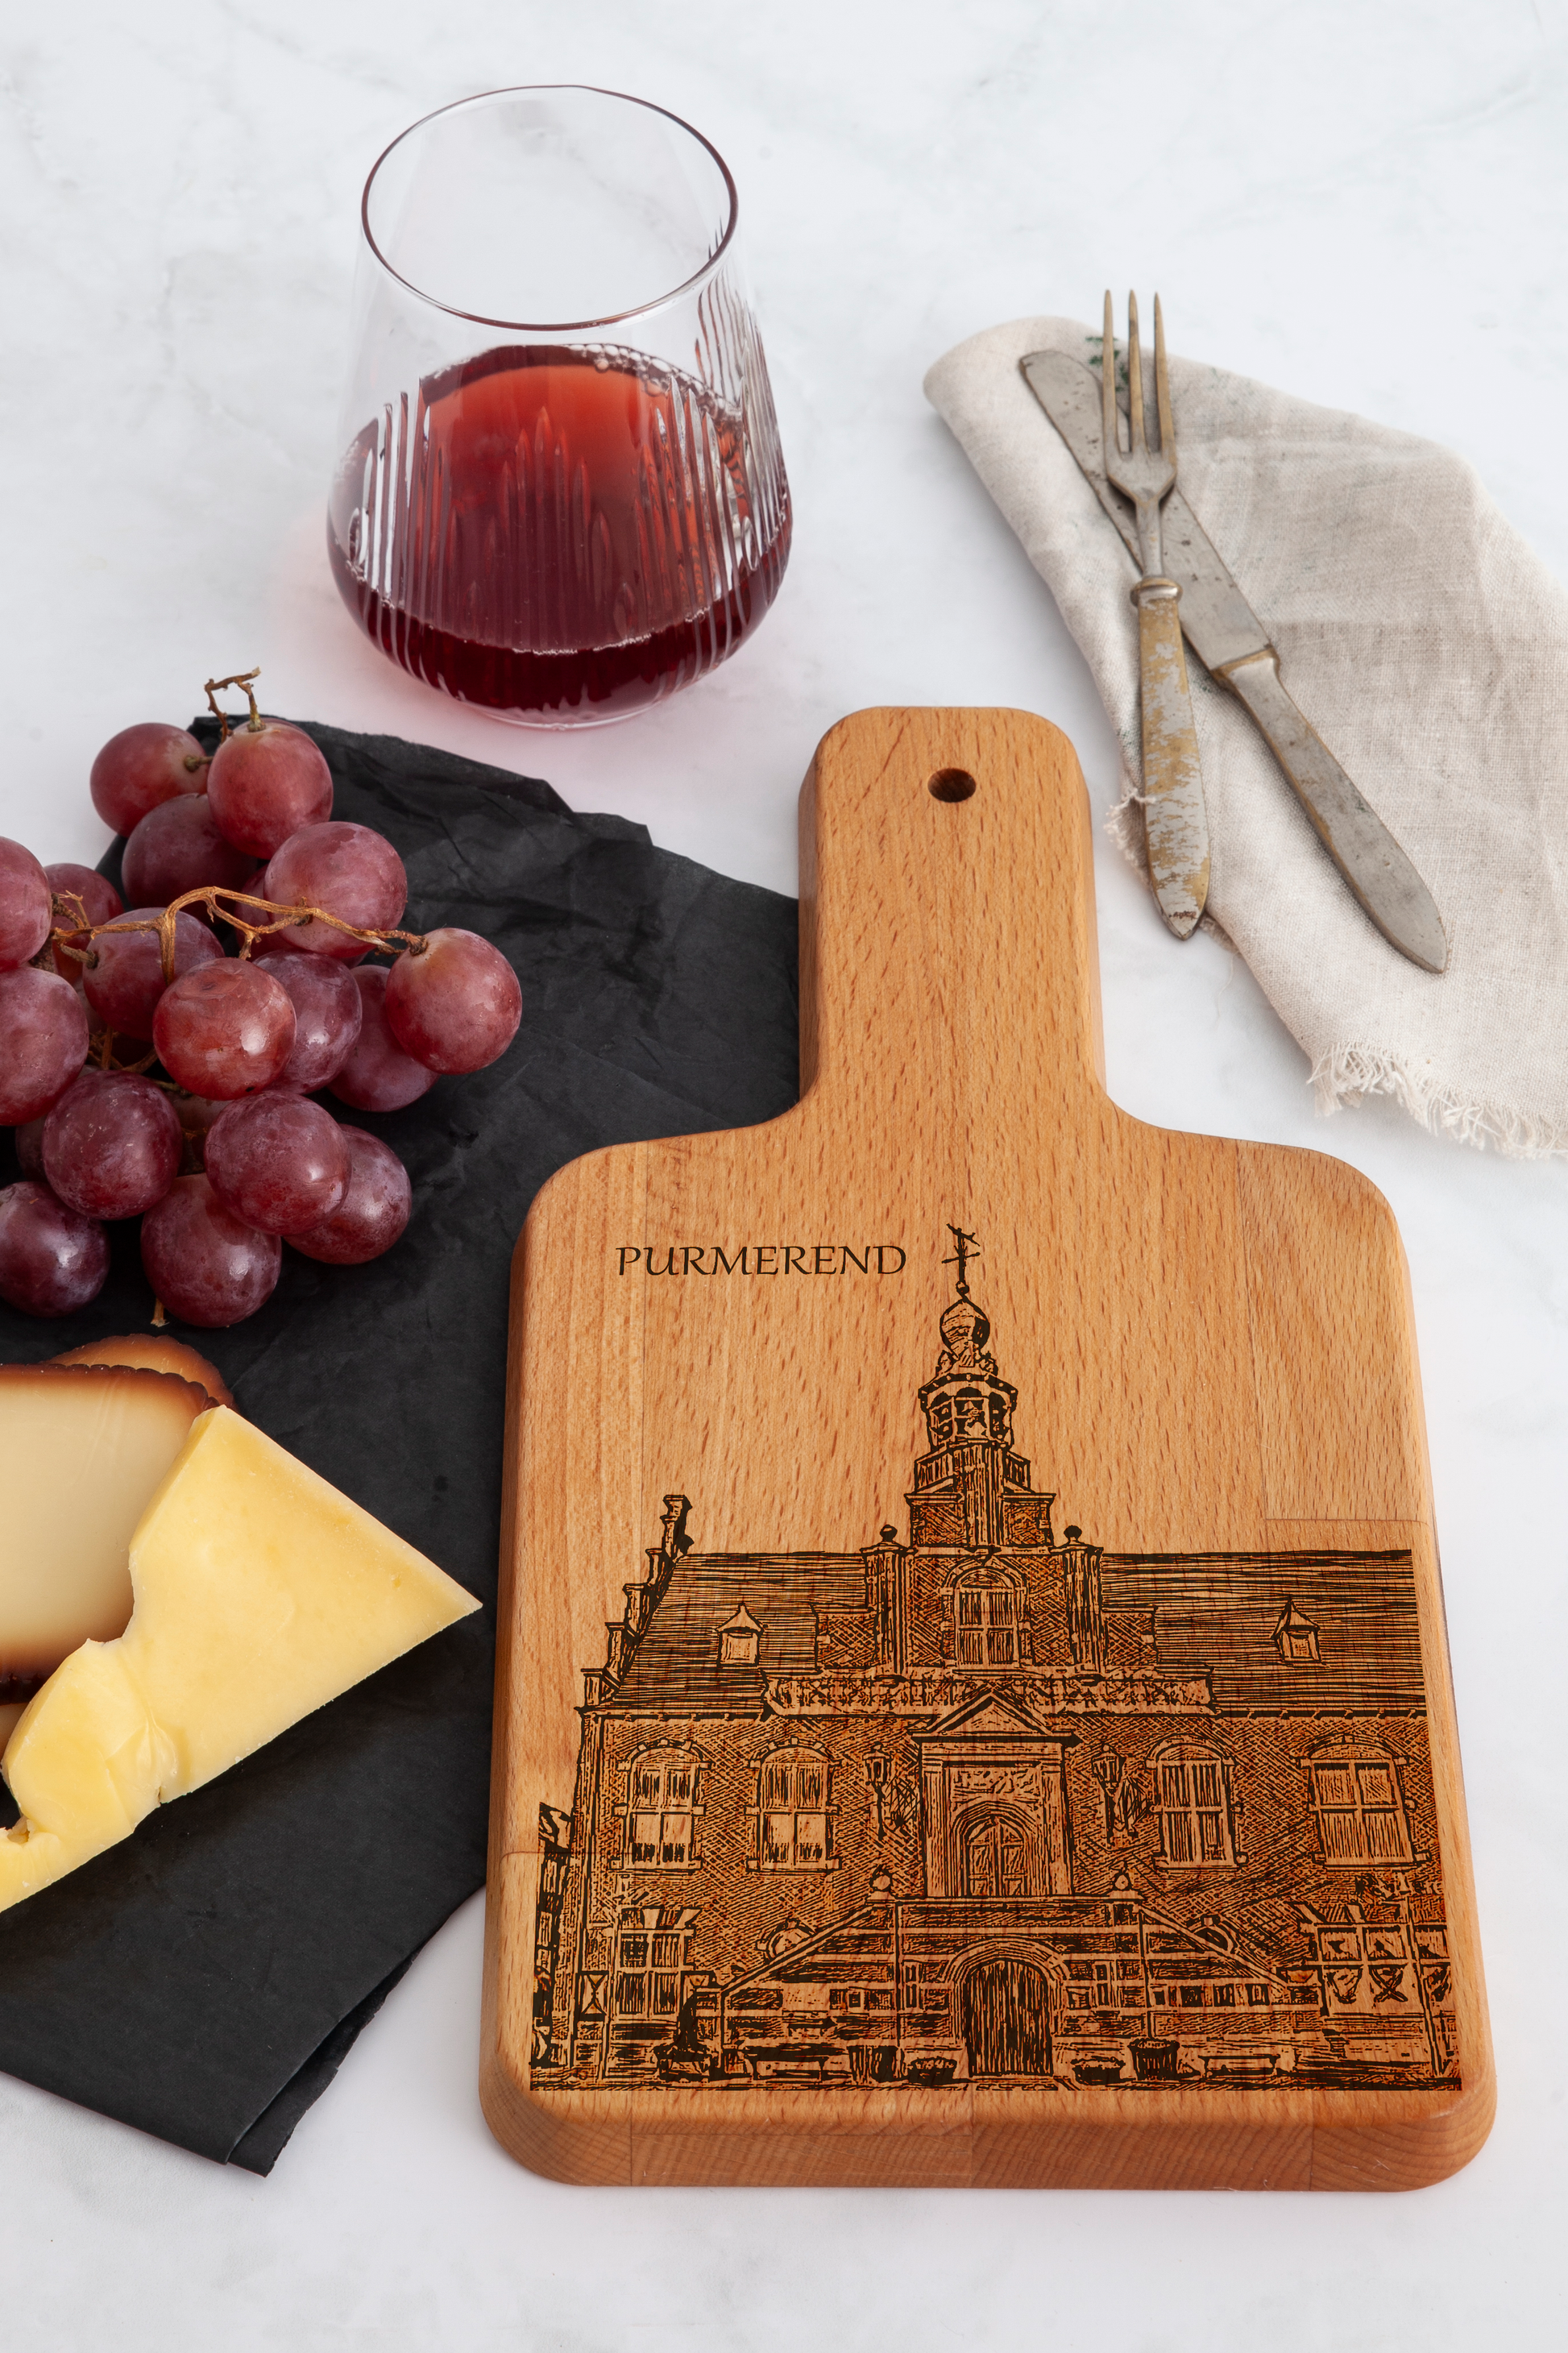 Purmerend, Stadhuis, cheese board, on countertop